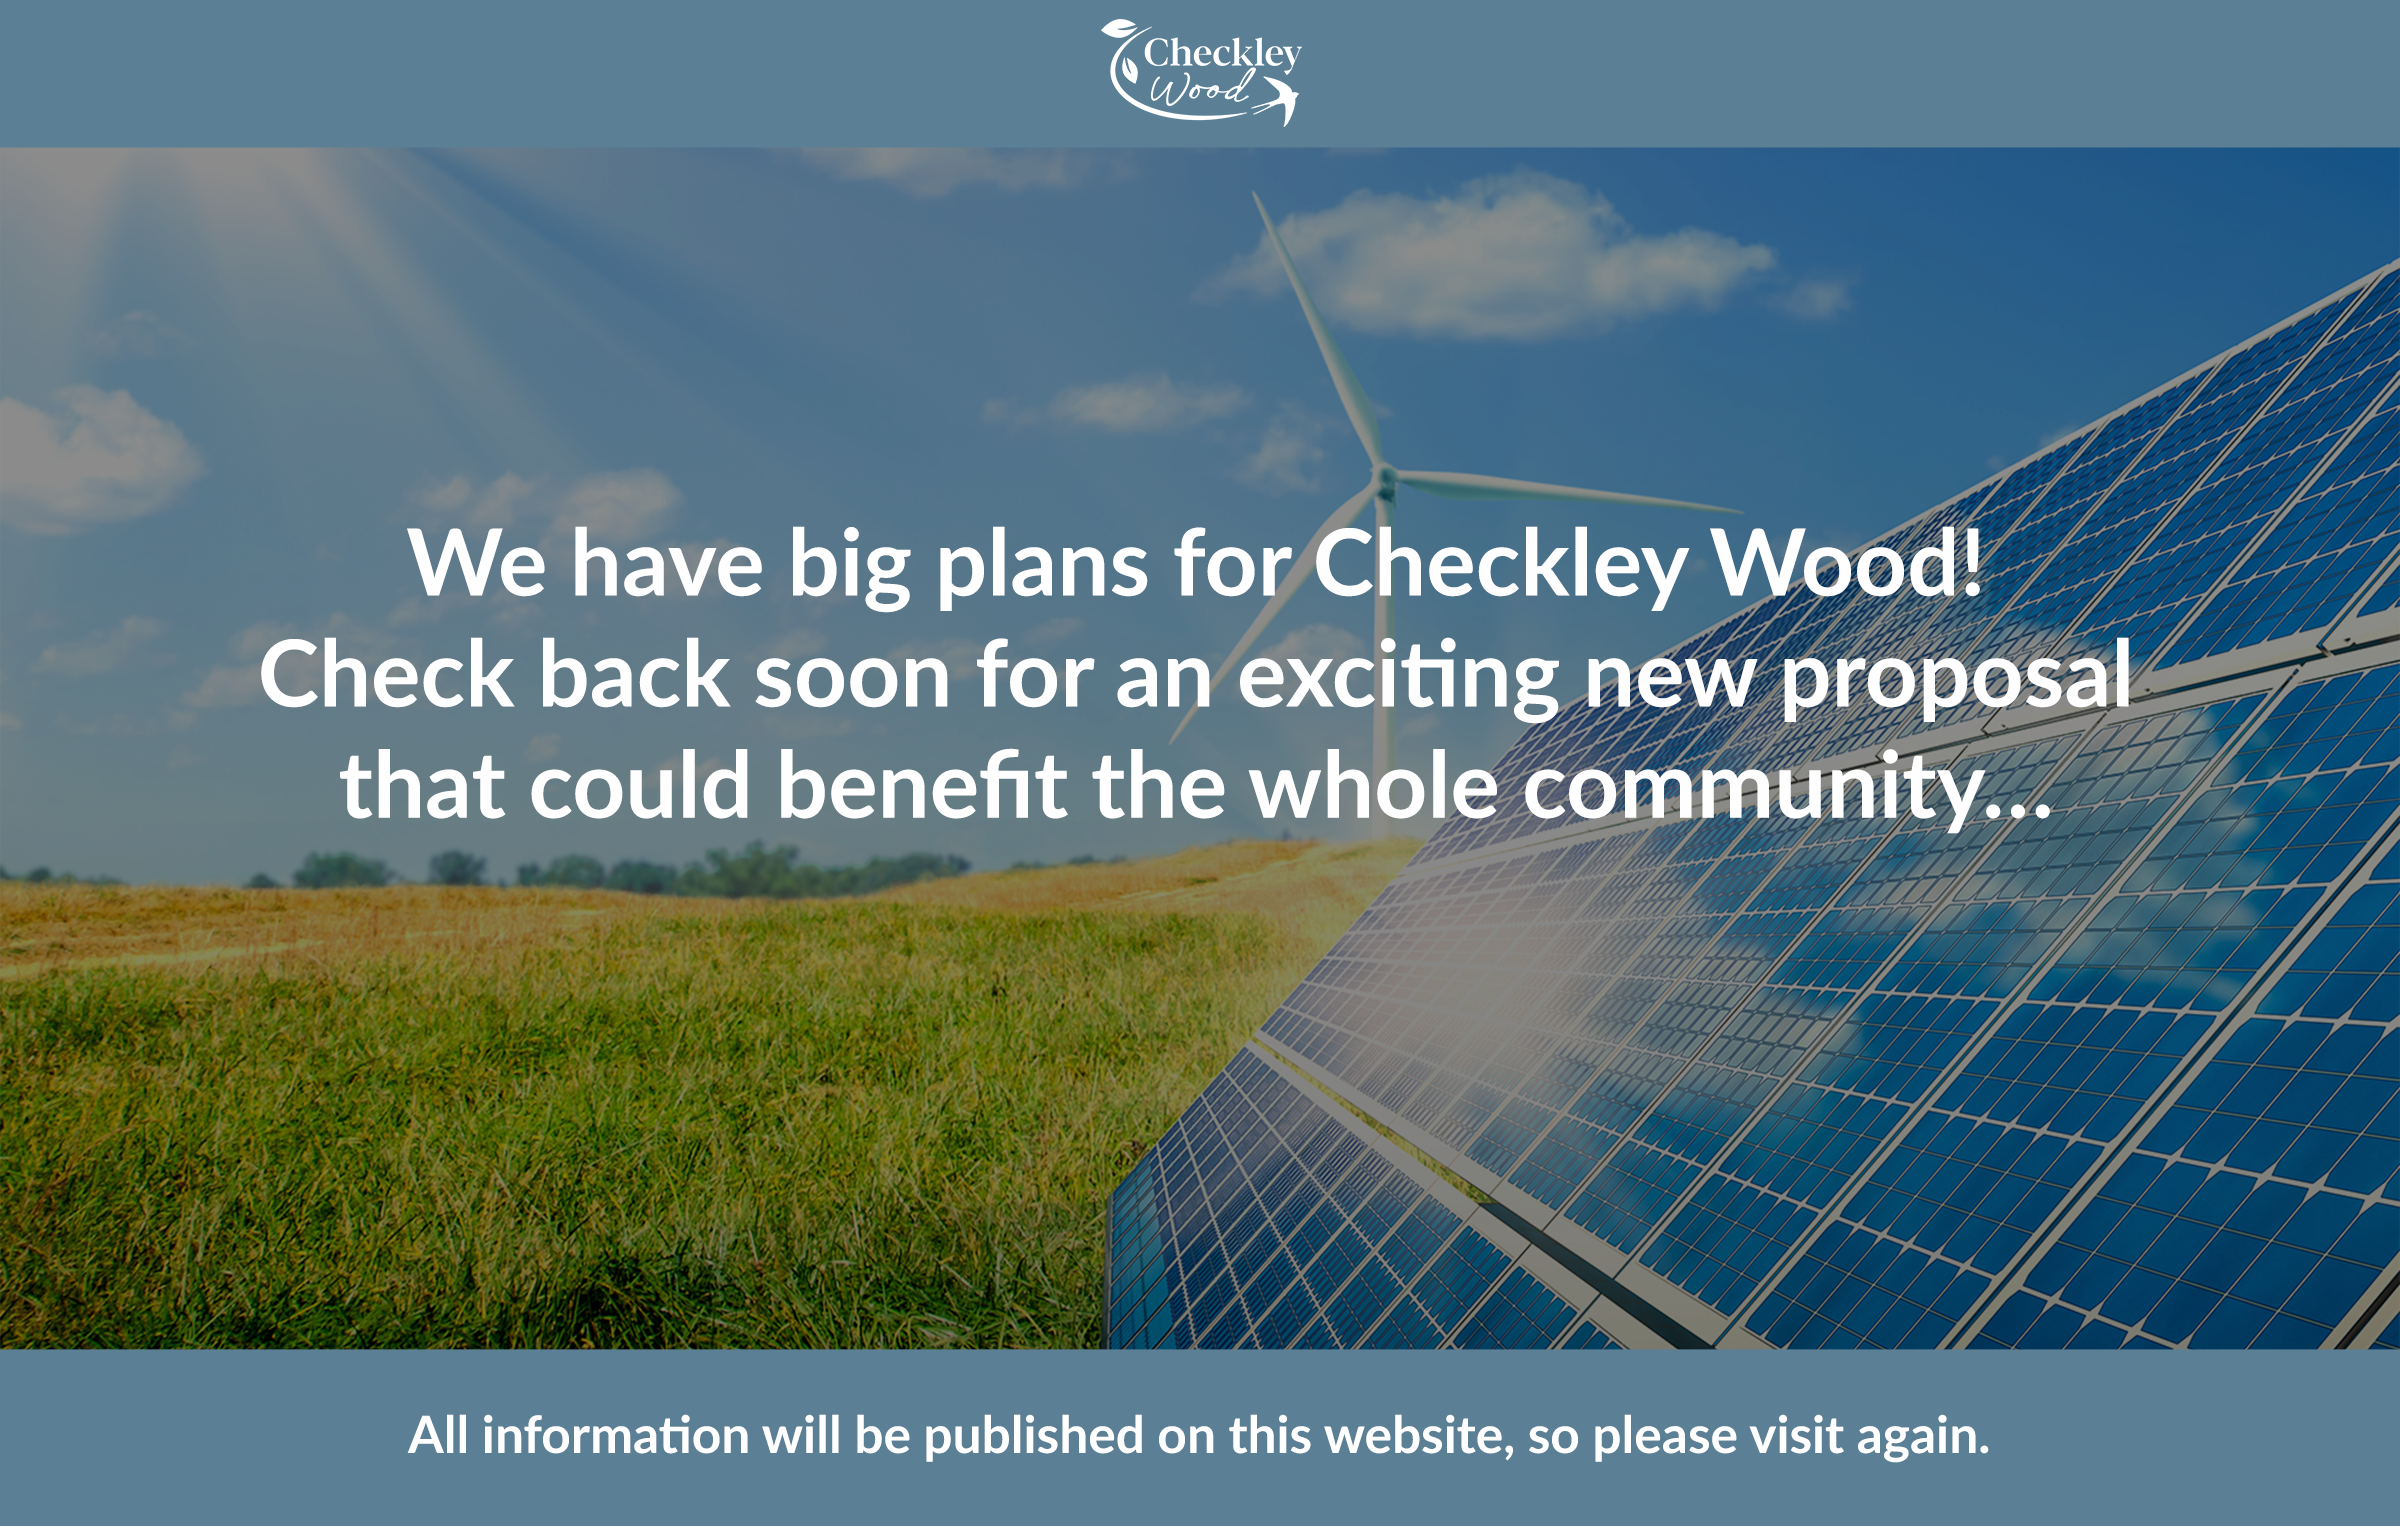 AWGroup will be announcing its vision for Checkley Wood in the near future.